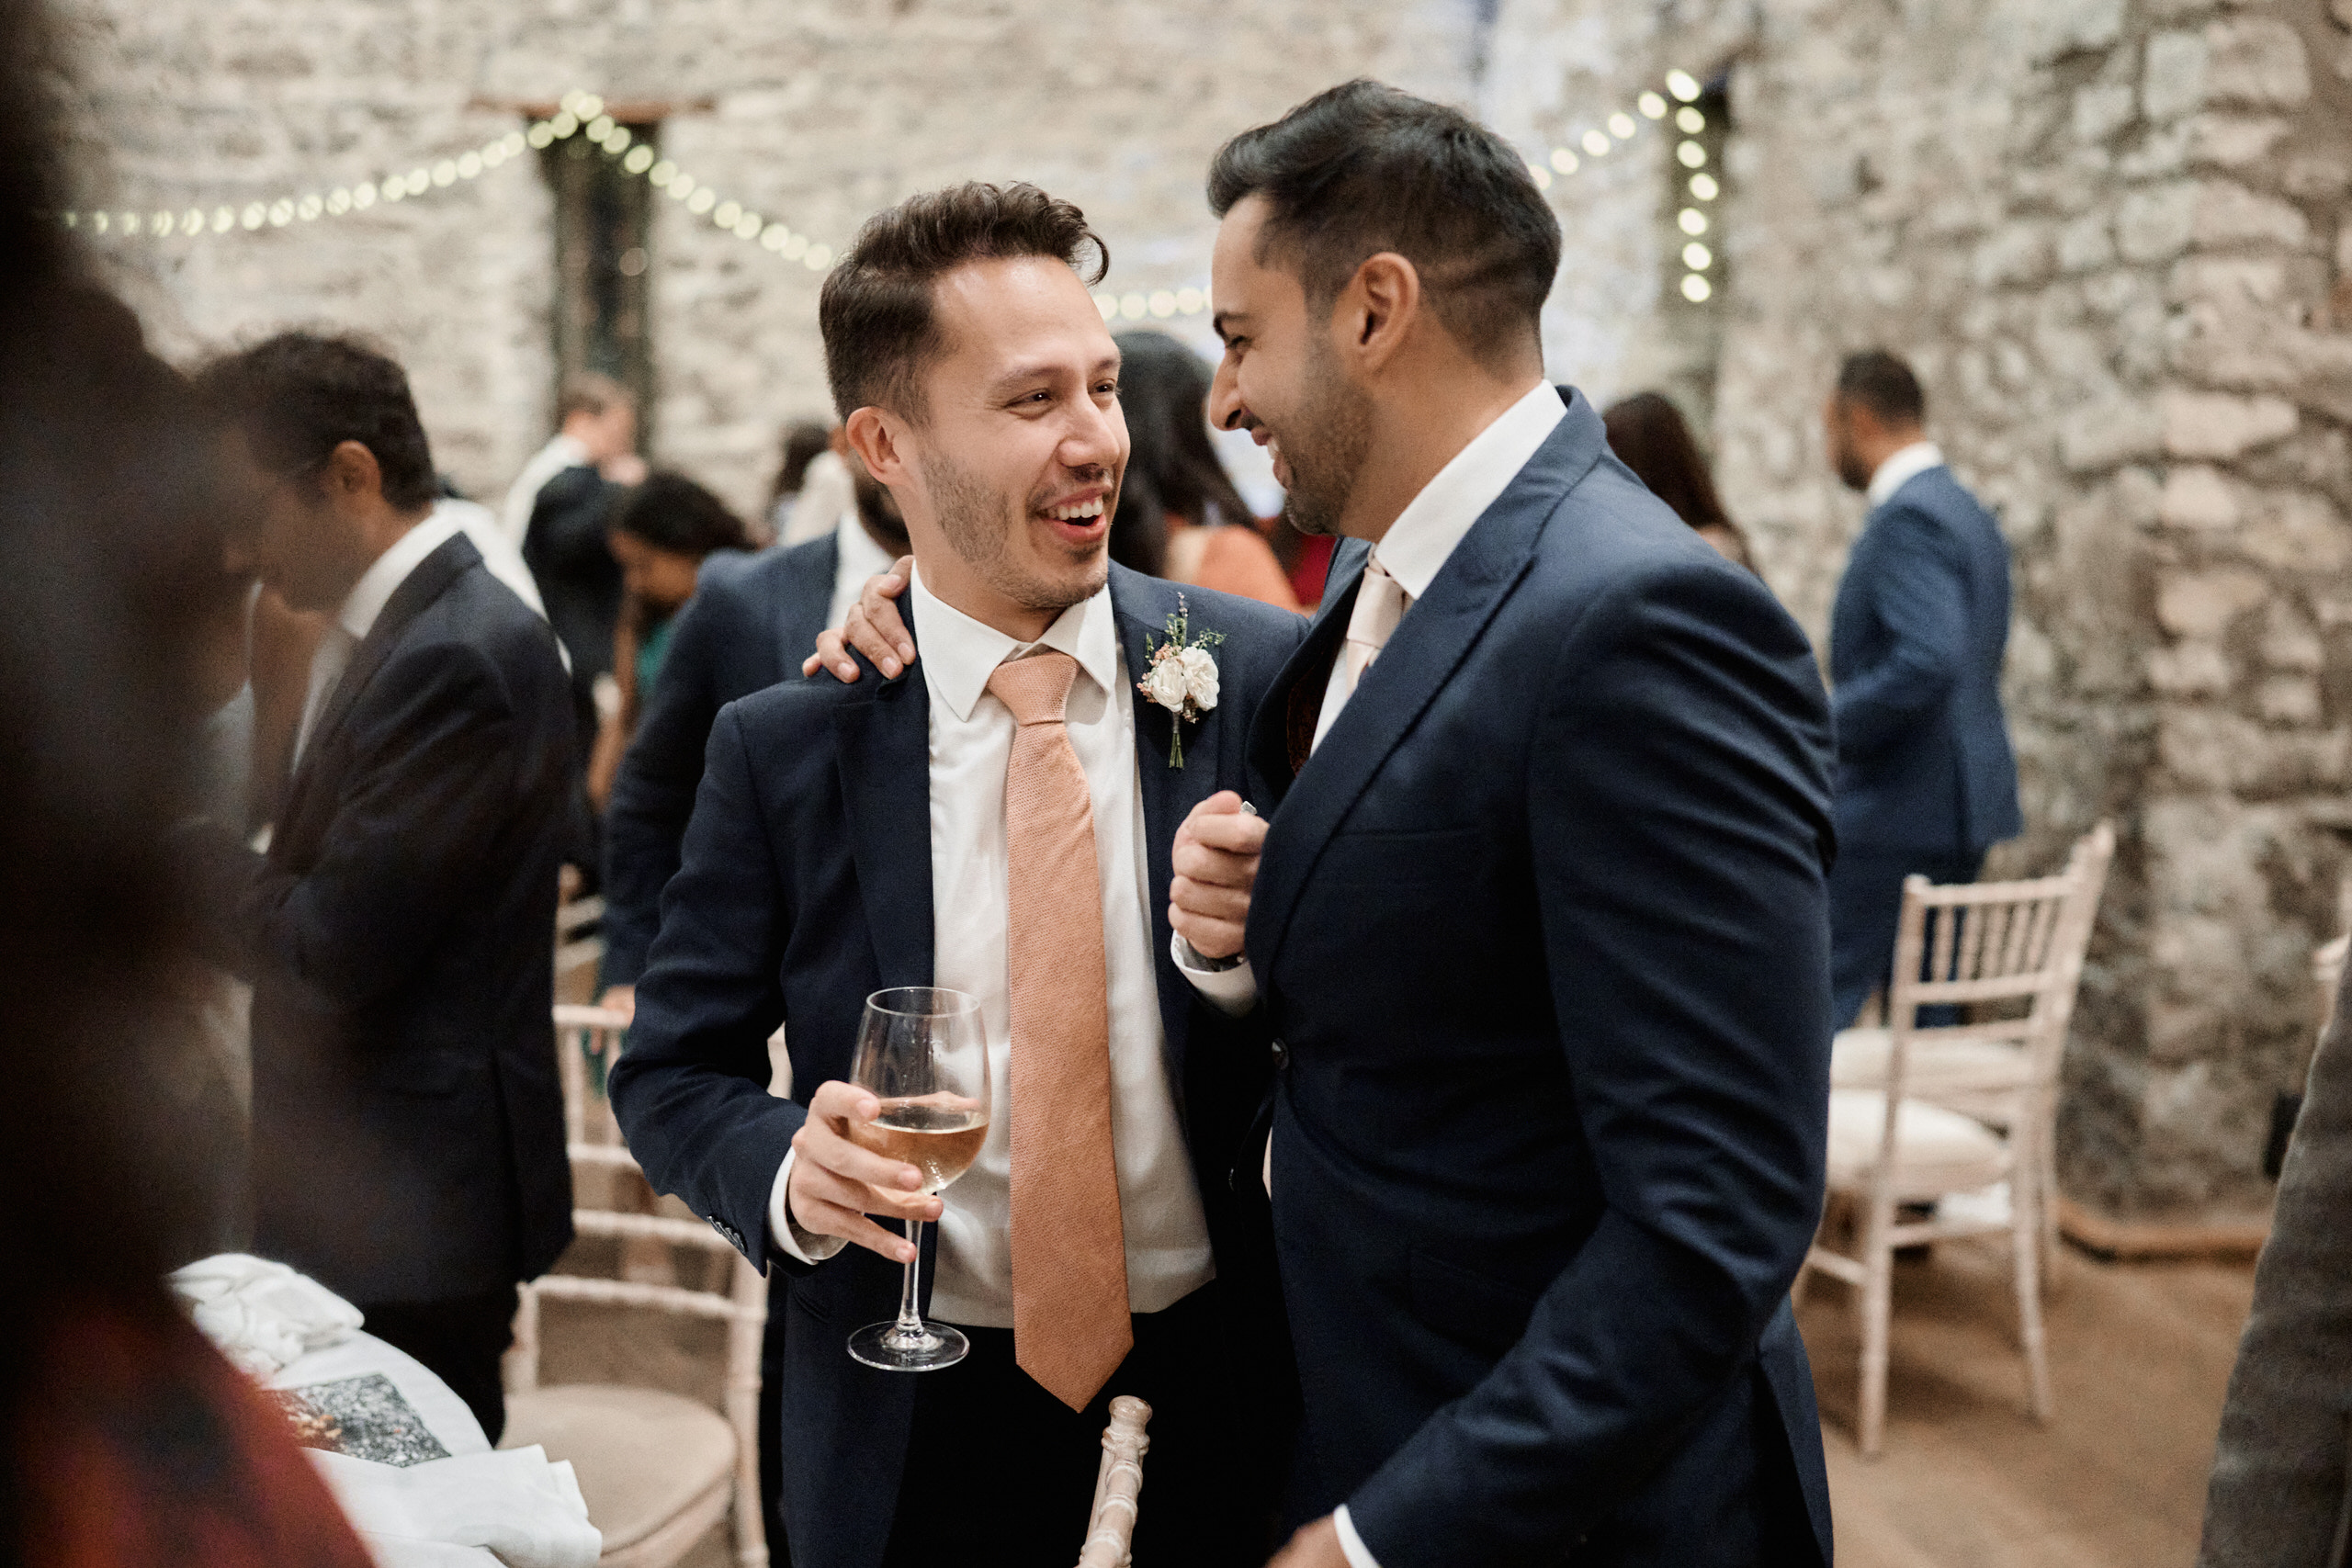 Two guys in suits cracking up at a wedding party.